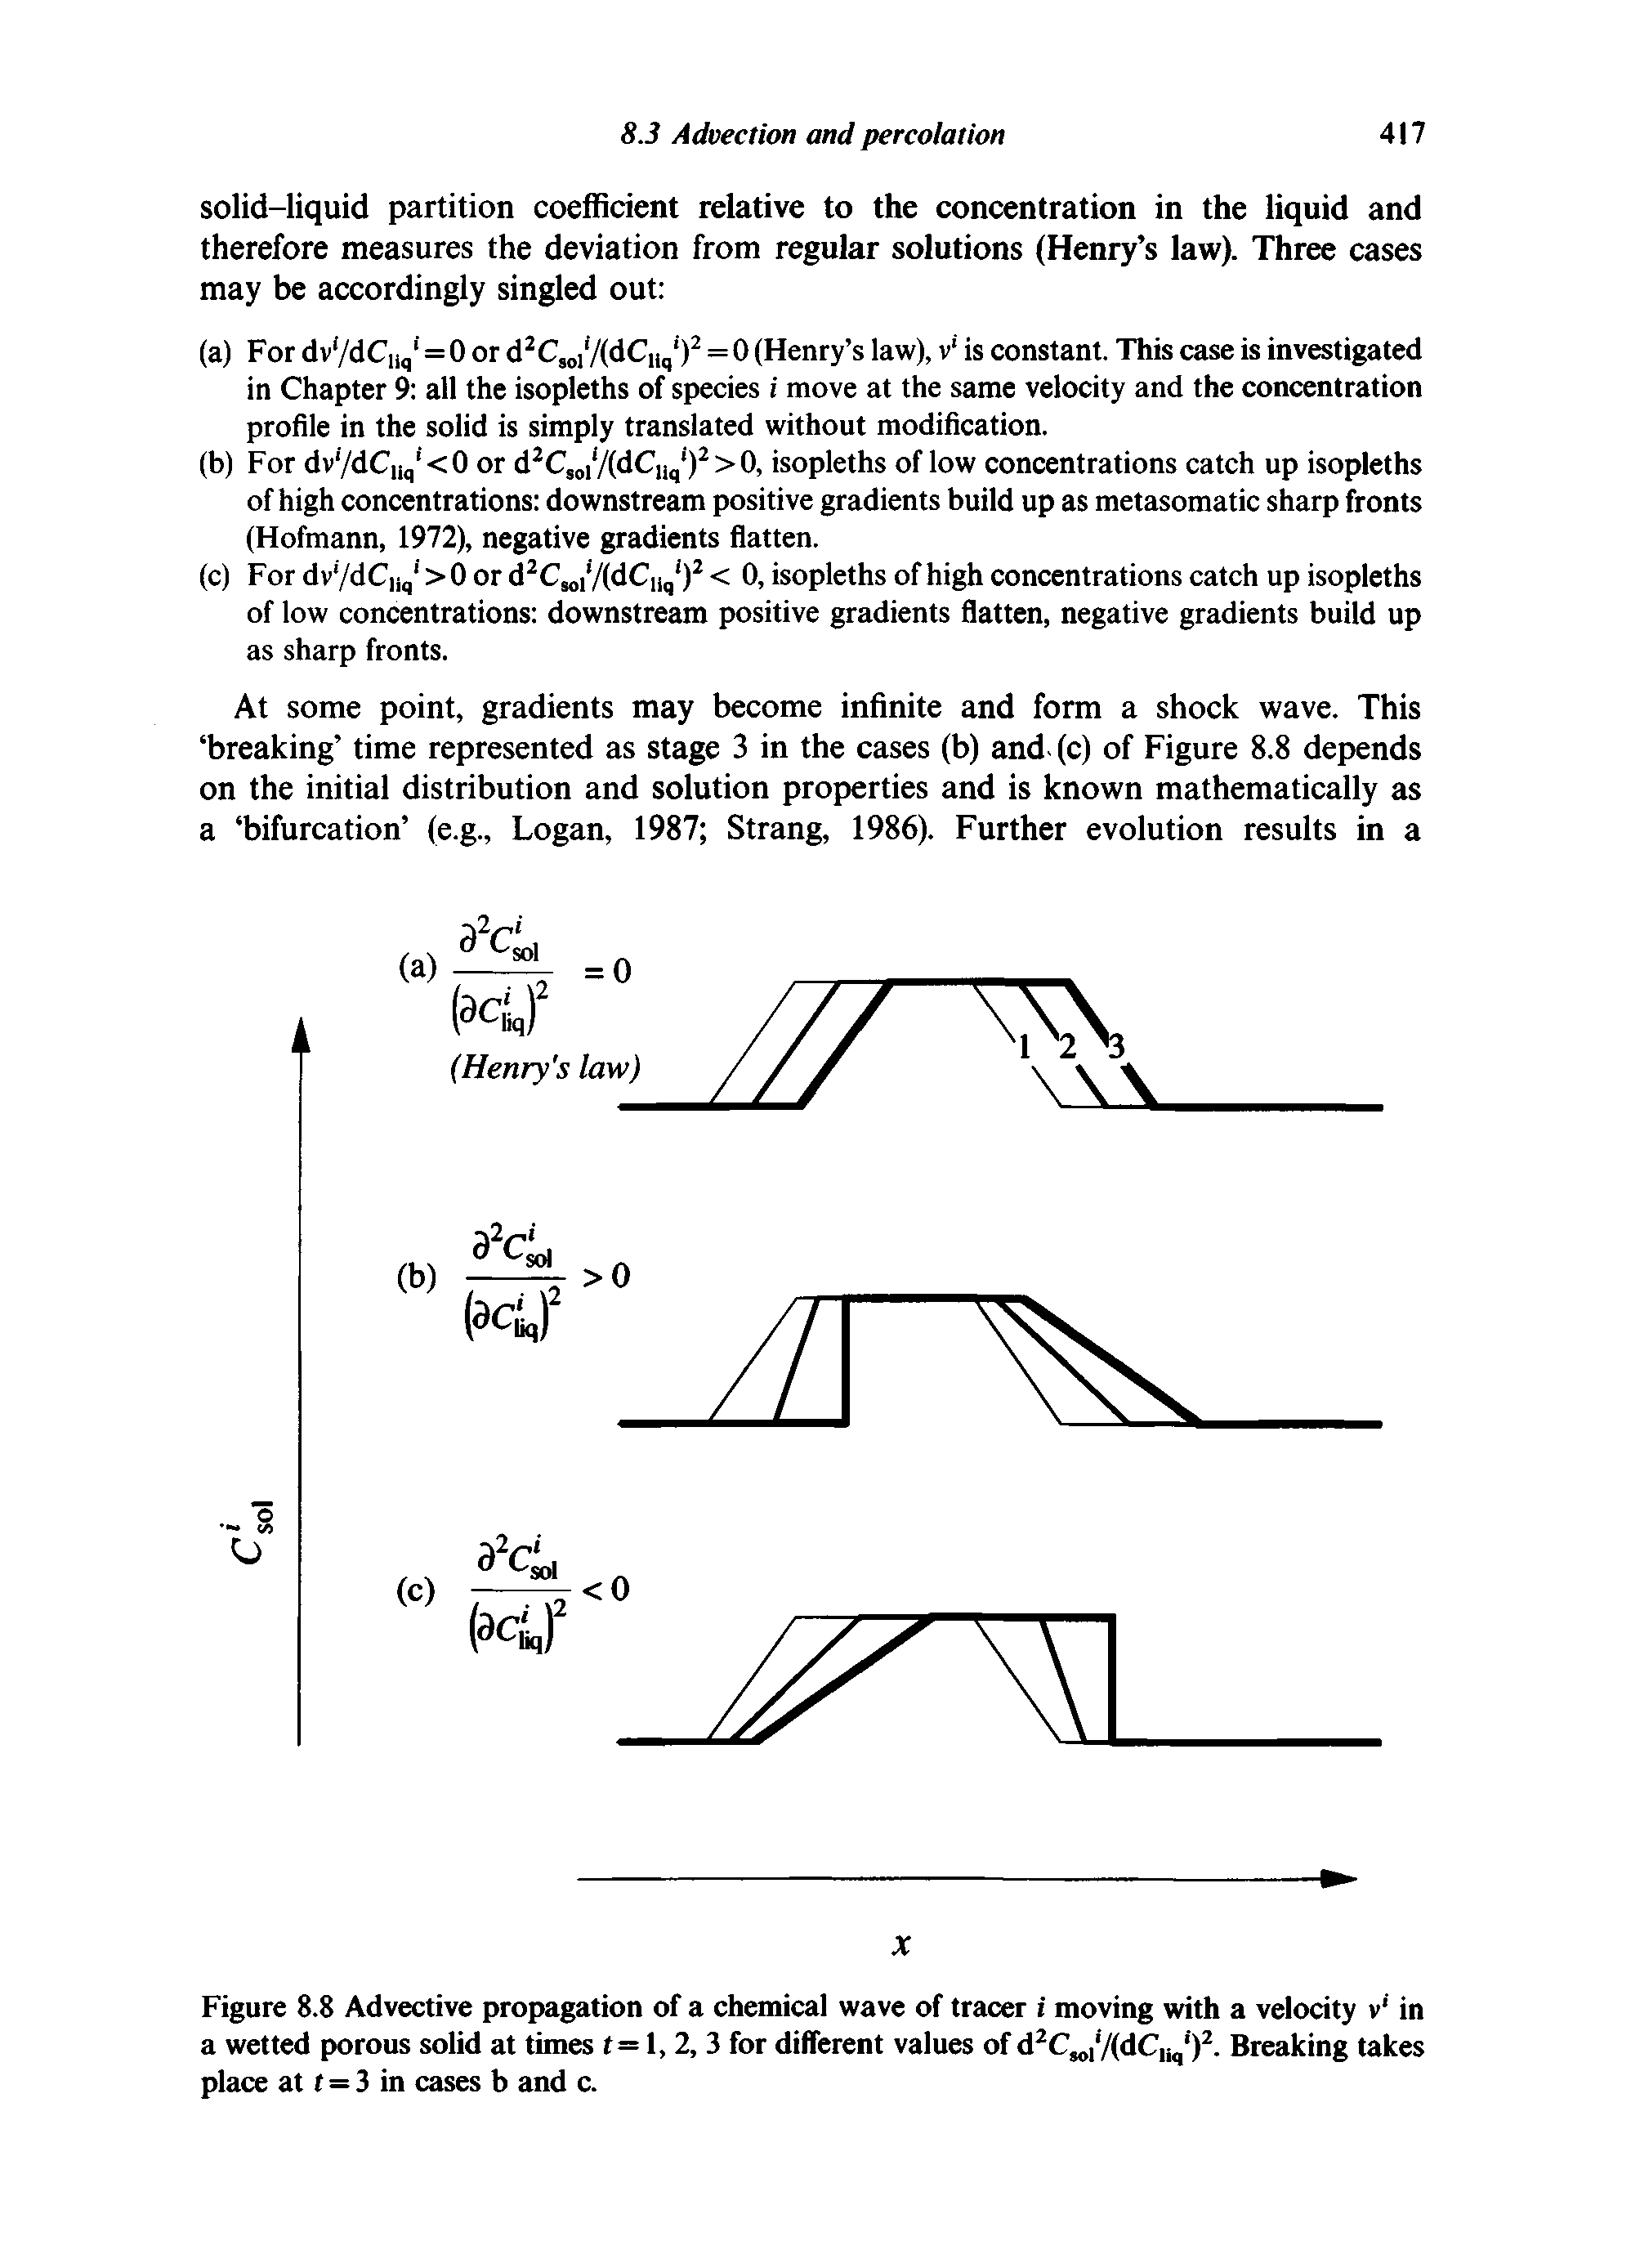 Figure 8.8 Advective propagation of a chemical wave of tracer i moving with a velocity v in a wetted porous solid at times t= 1,2, 3 for different values of d2Cwl7(dCUq )2. Breaking takes place at t = 3 in cases b and c.